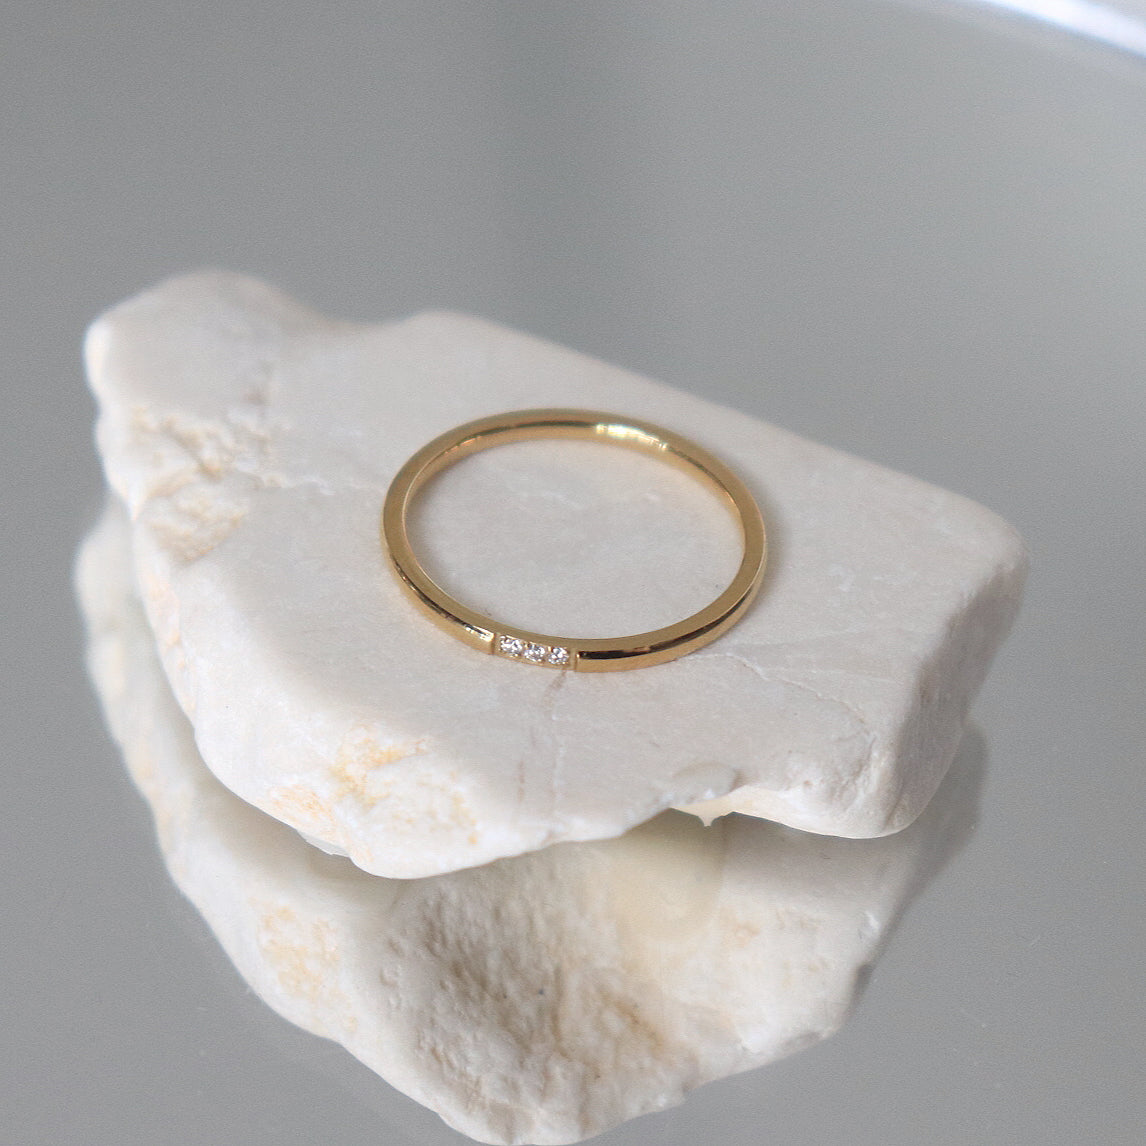 Everyday Elegance: Gold Plated Minimalist Style Ring - Elevate Your Look with Timeless Simplicity